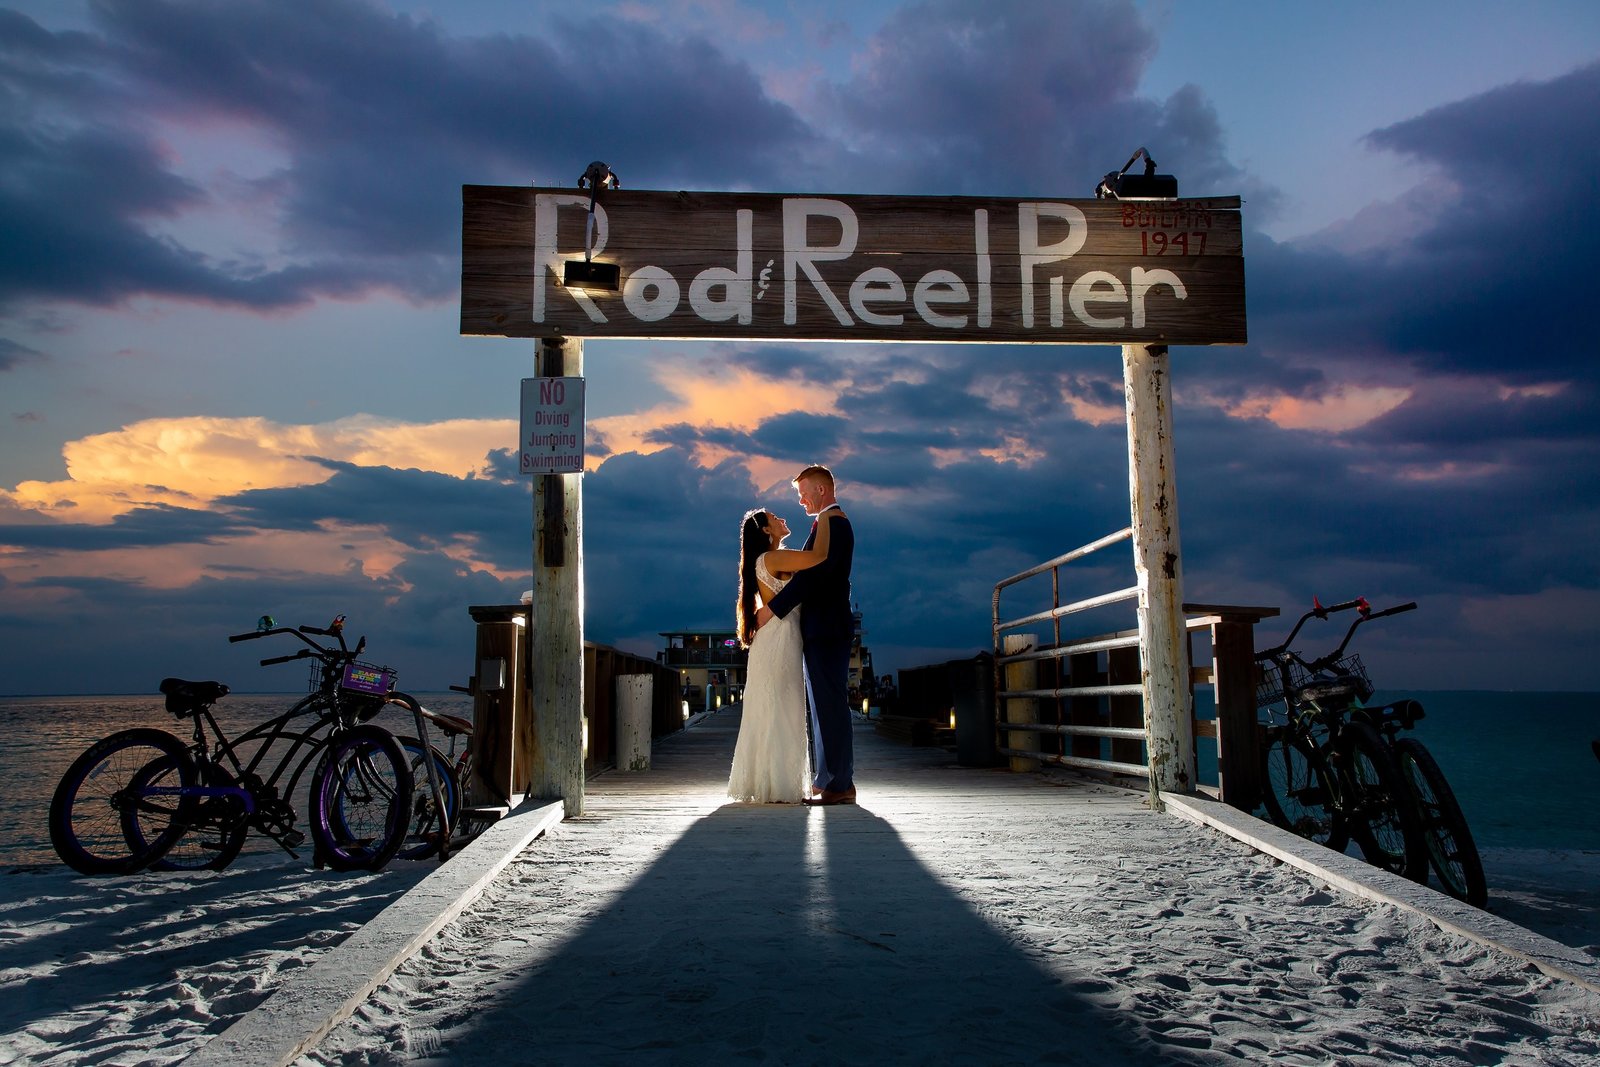 Bride and groom backlit after sunset on Rod and Reel Pier in Anna Maria, Fl